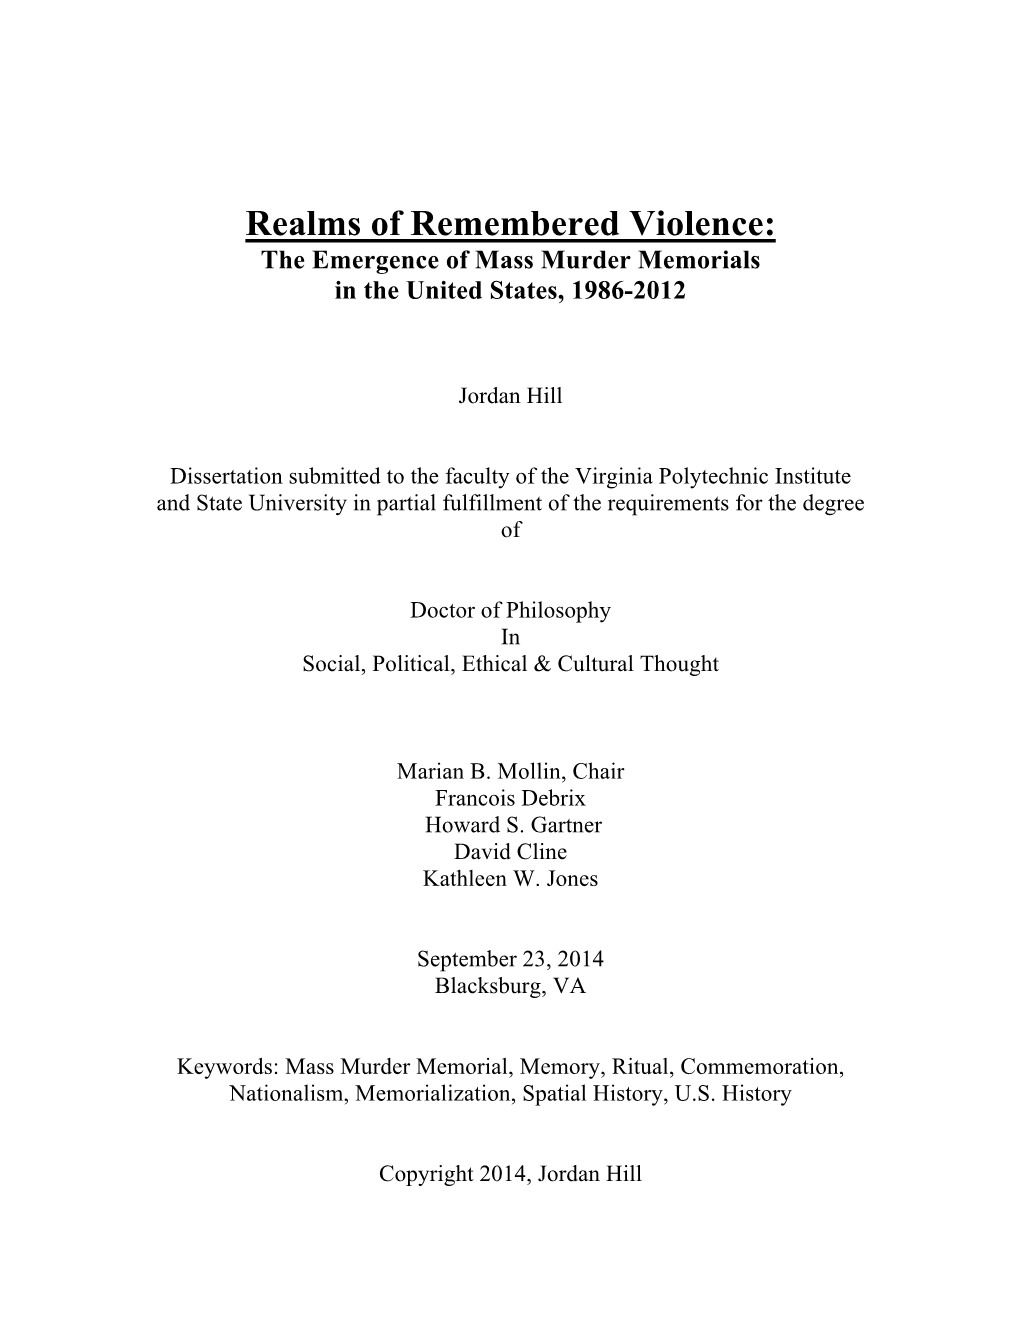 Realms of Remembered Violence: the Emergence of Mass Murder Memorials in the United States, 1986-2012